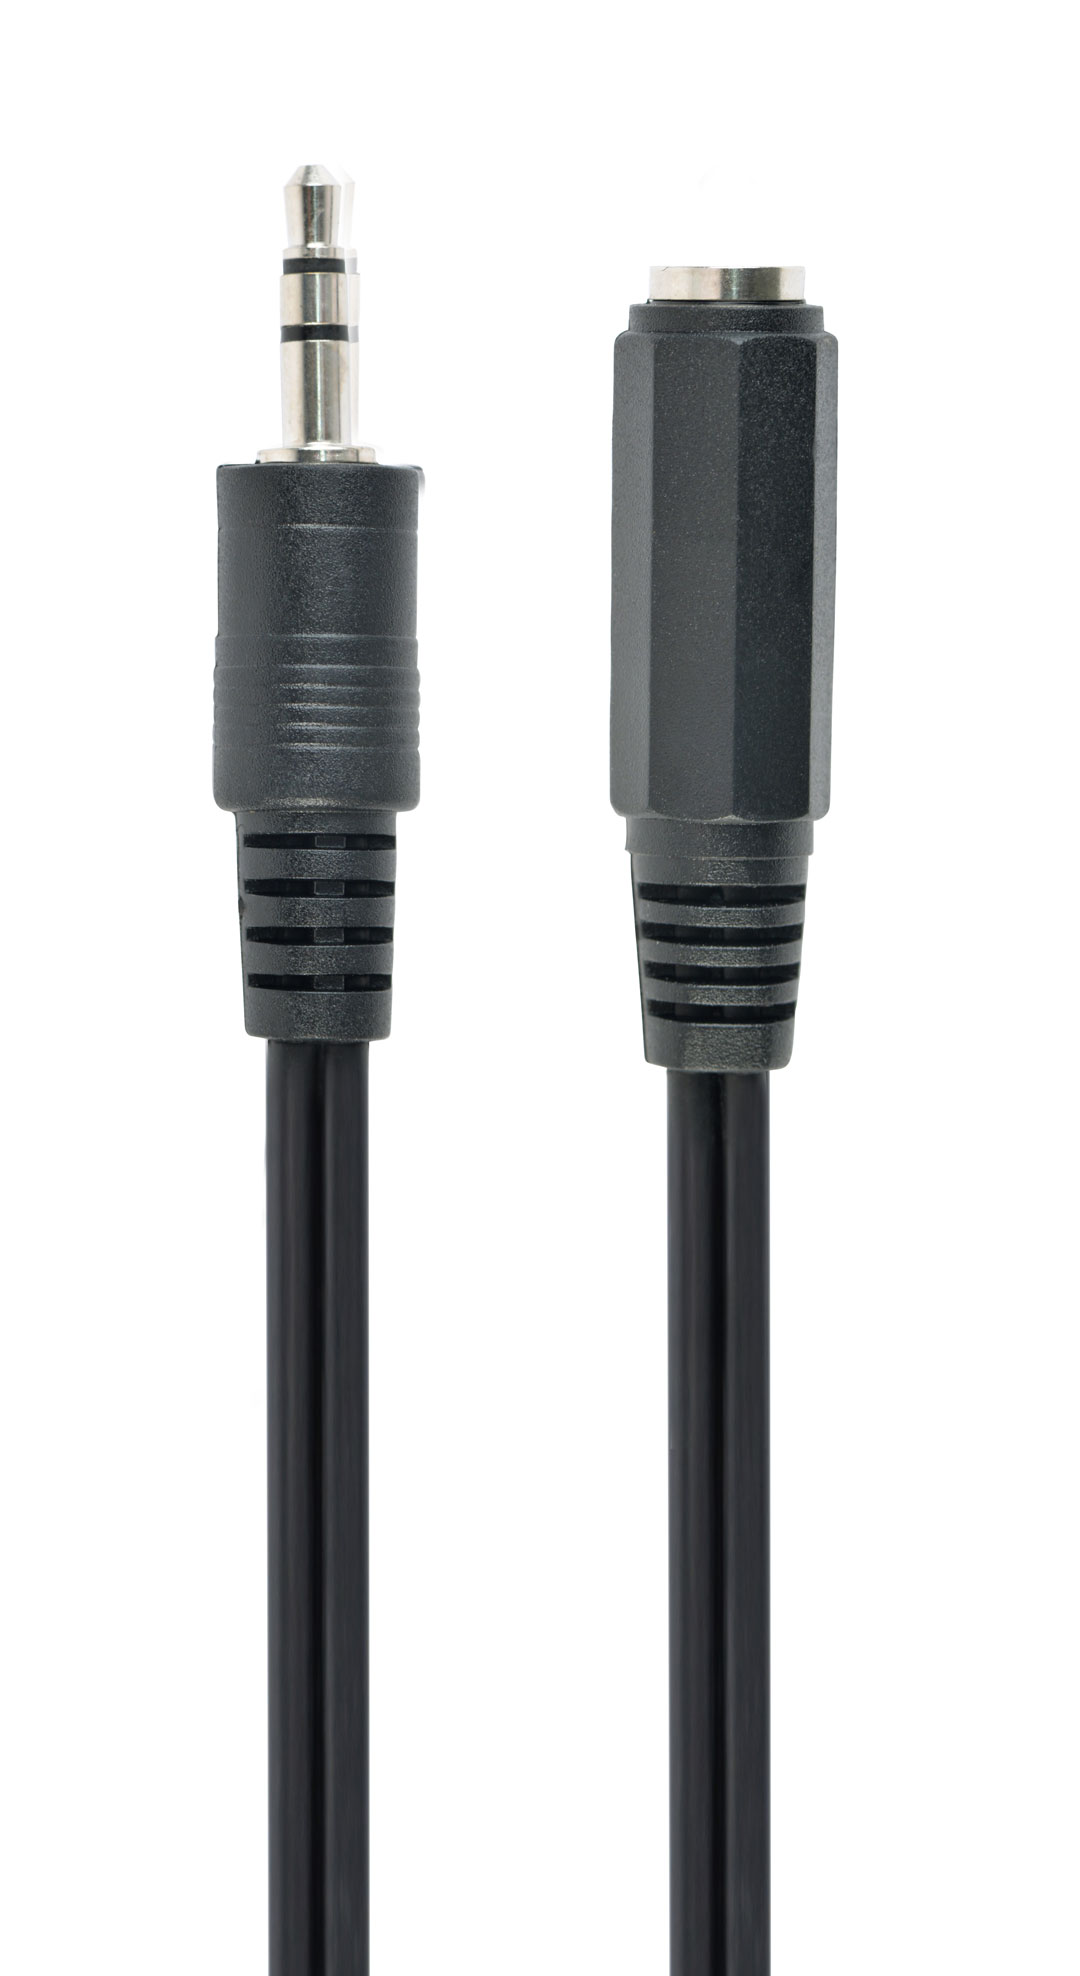 CABLEXPERT 3,5MM AUDIO CABLE 1.5M